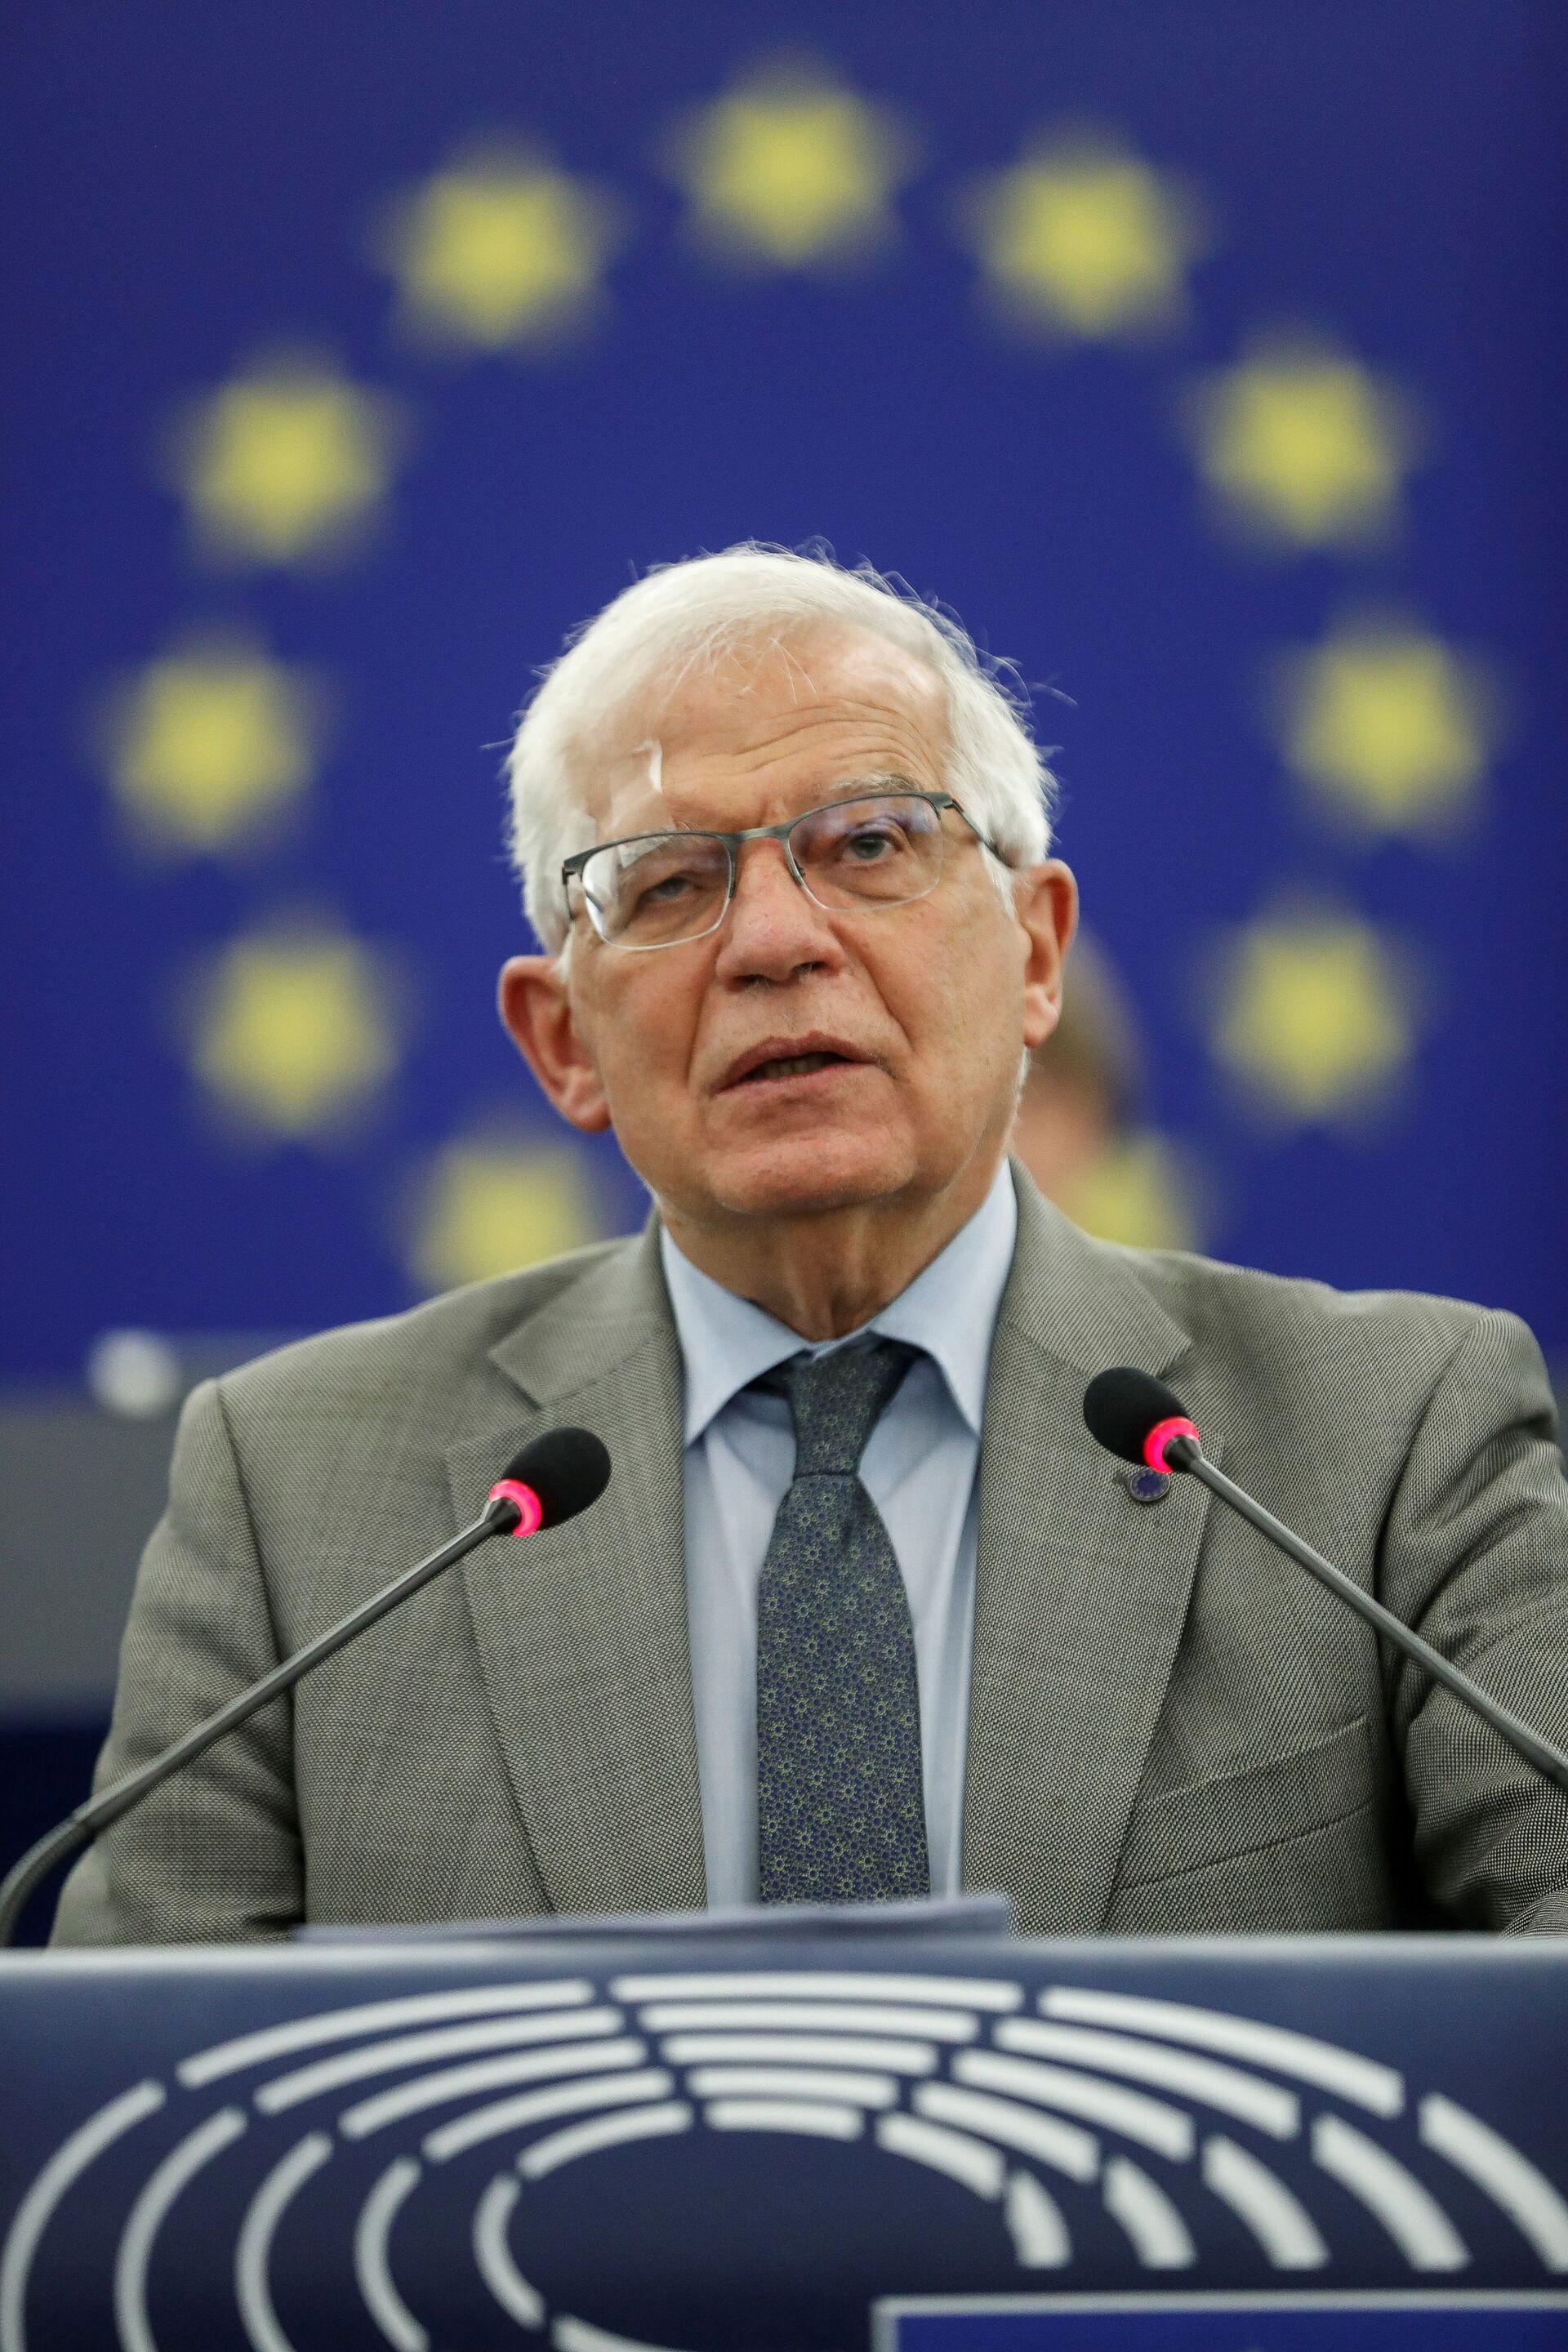 FILE PHOTO: Josep Borrell, vice president of the European Commission in charge of coordinating the external action of the European Union, delivers a speech at the European Parliament, in Strasbourg, France, June 8, 2021 - Sputnik International, 1920, 07.02.2022